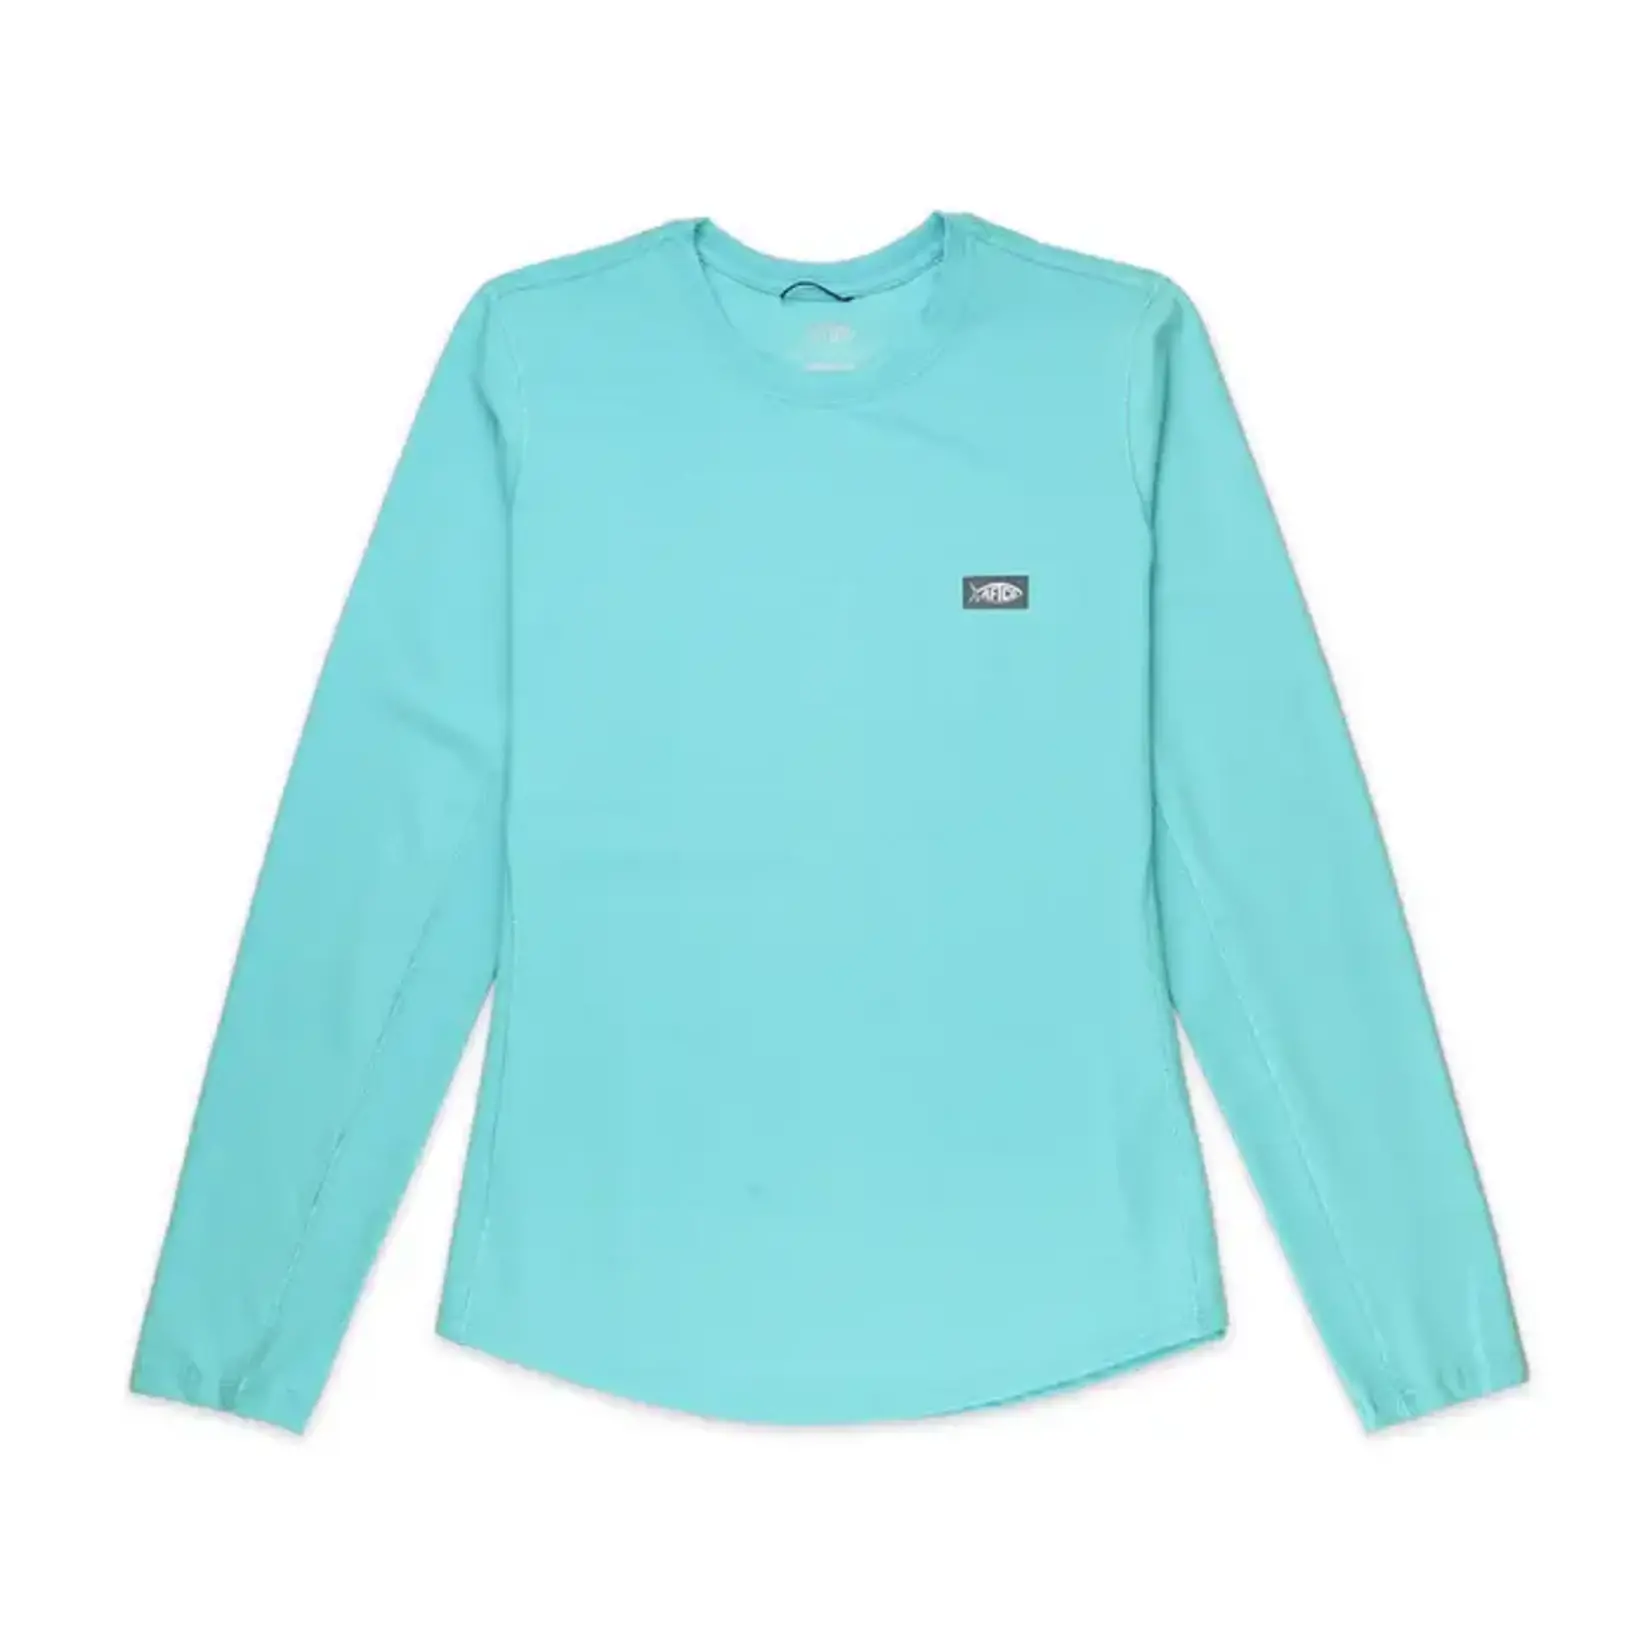 Aftco Aftco Women's Air O Mesh L/S Performance Shirt